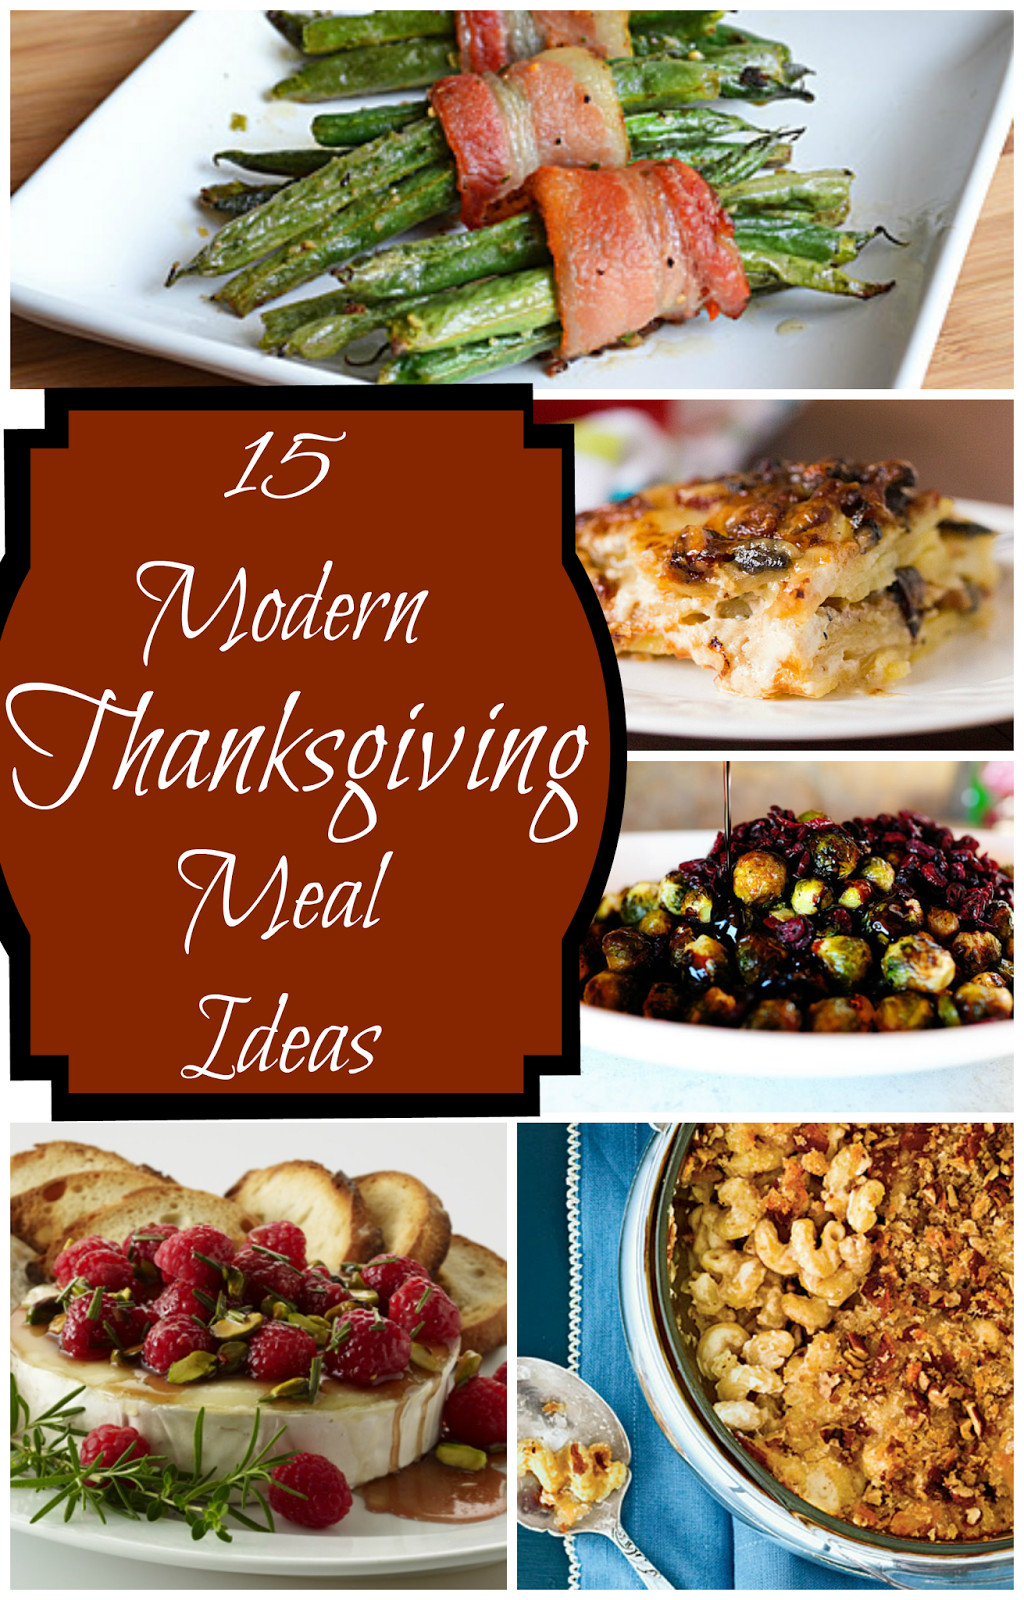 Turkey Dinner Ideas
 Not Your Mother s Recipes 15 Modern Thanksgiving Meal